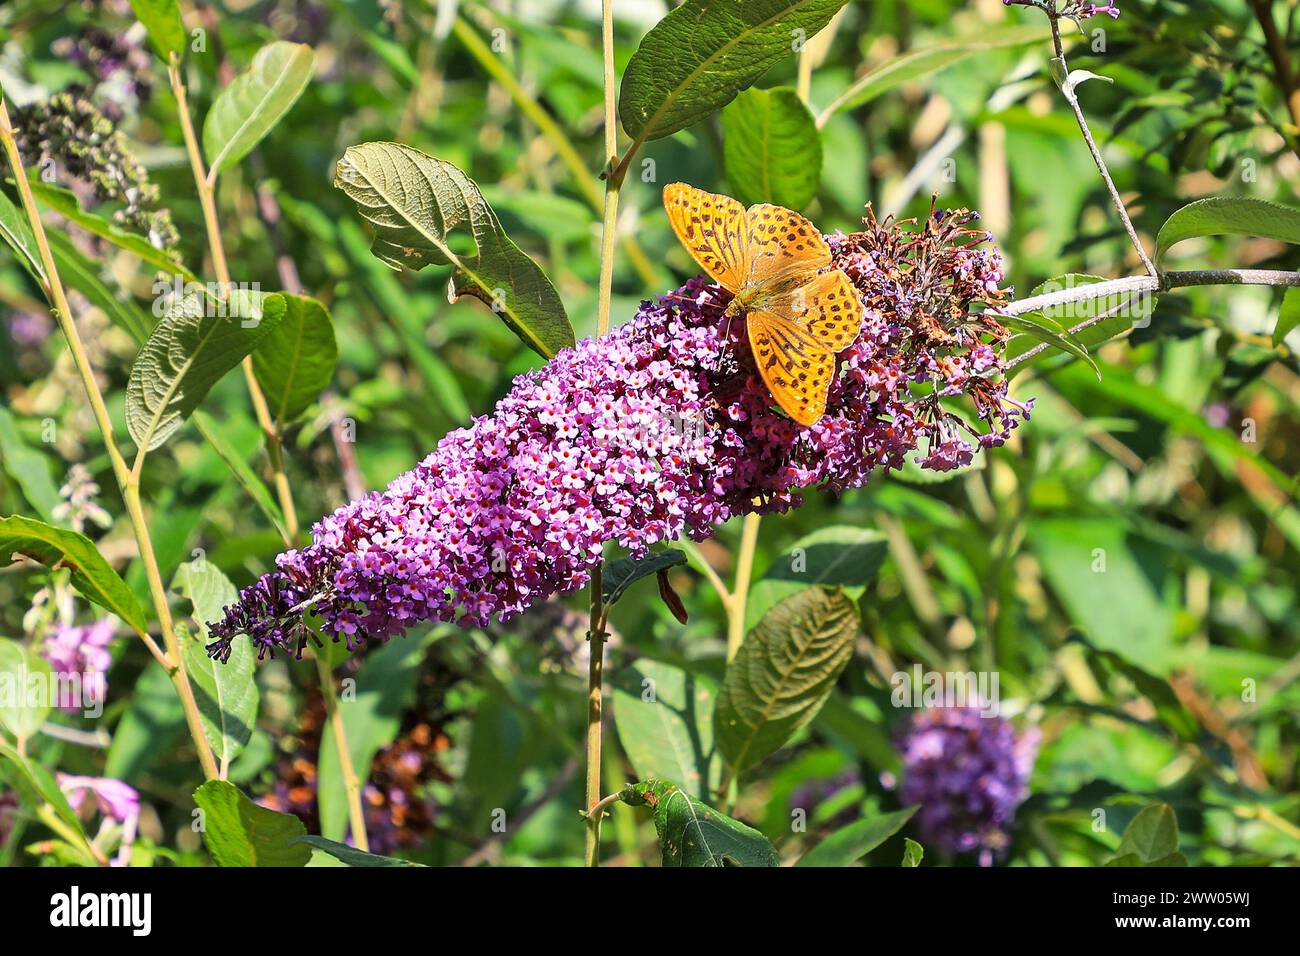 A close up shot of a Silver-washed Fritillary (Argynnis paphia) butterfly, Cornwall, England, UK Stock Photo